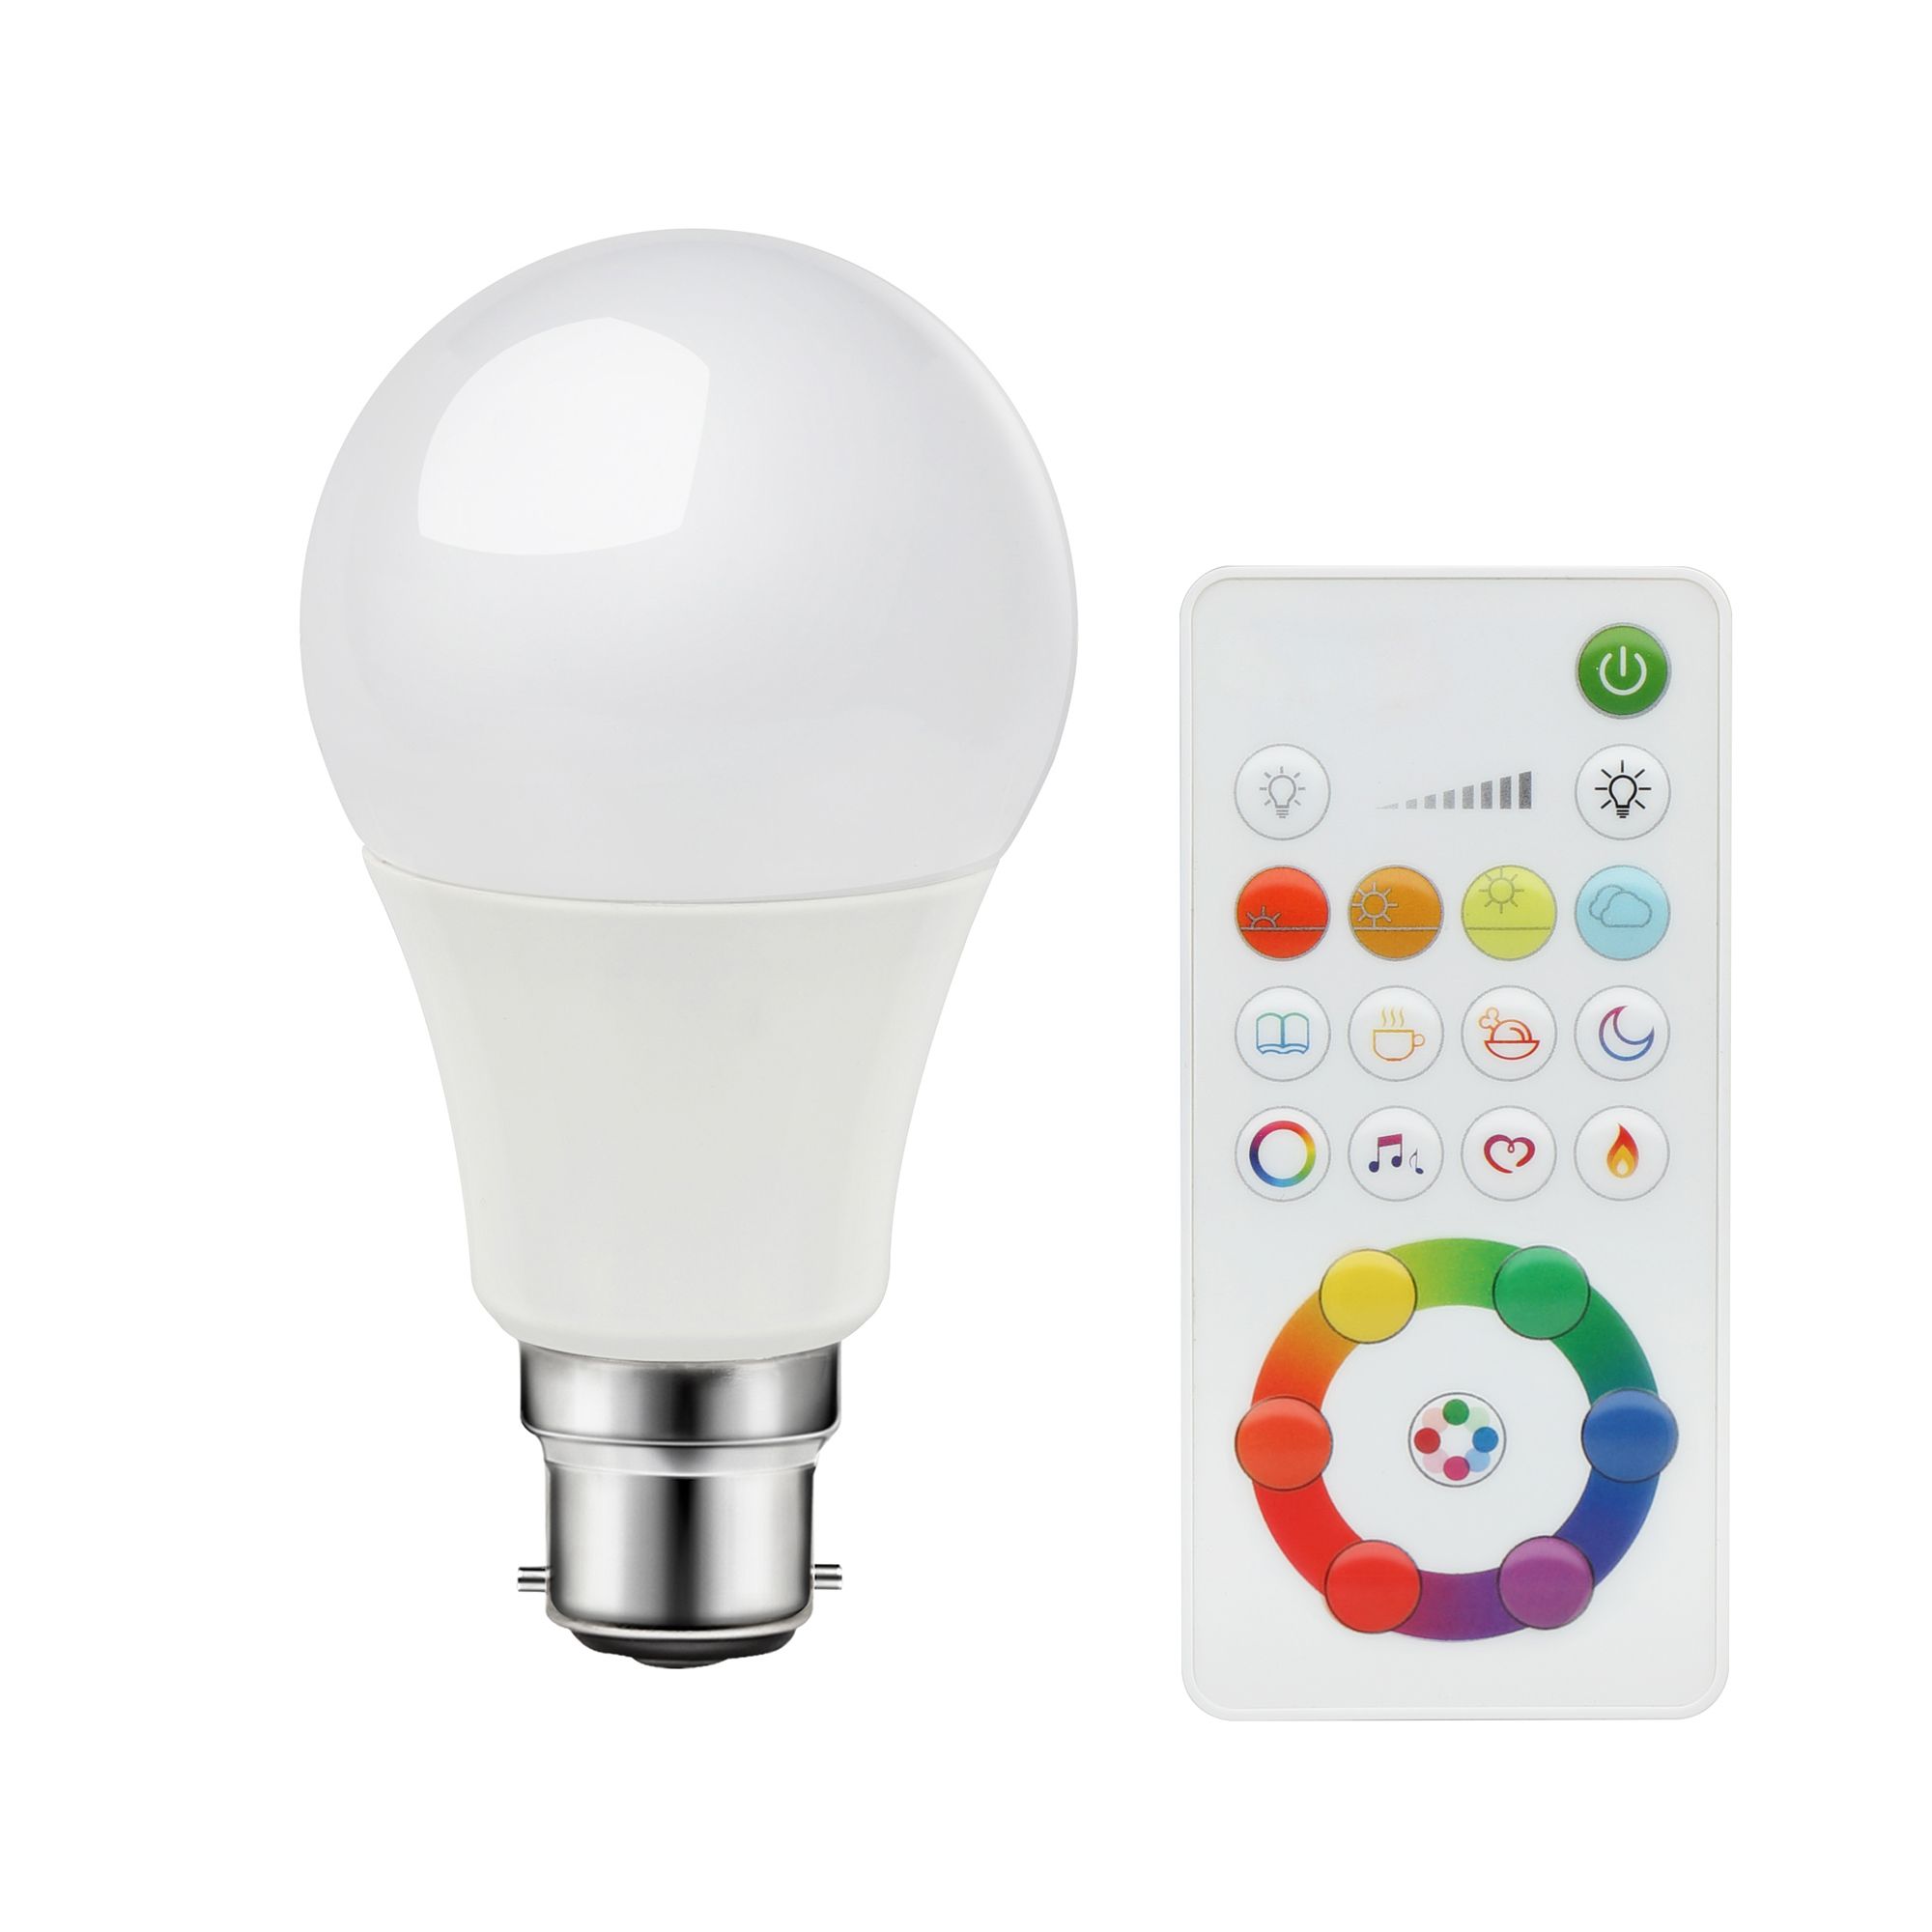 Diall B22 60W LED Cool white, RGB & warm white GLS Dimmable Light bulb